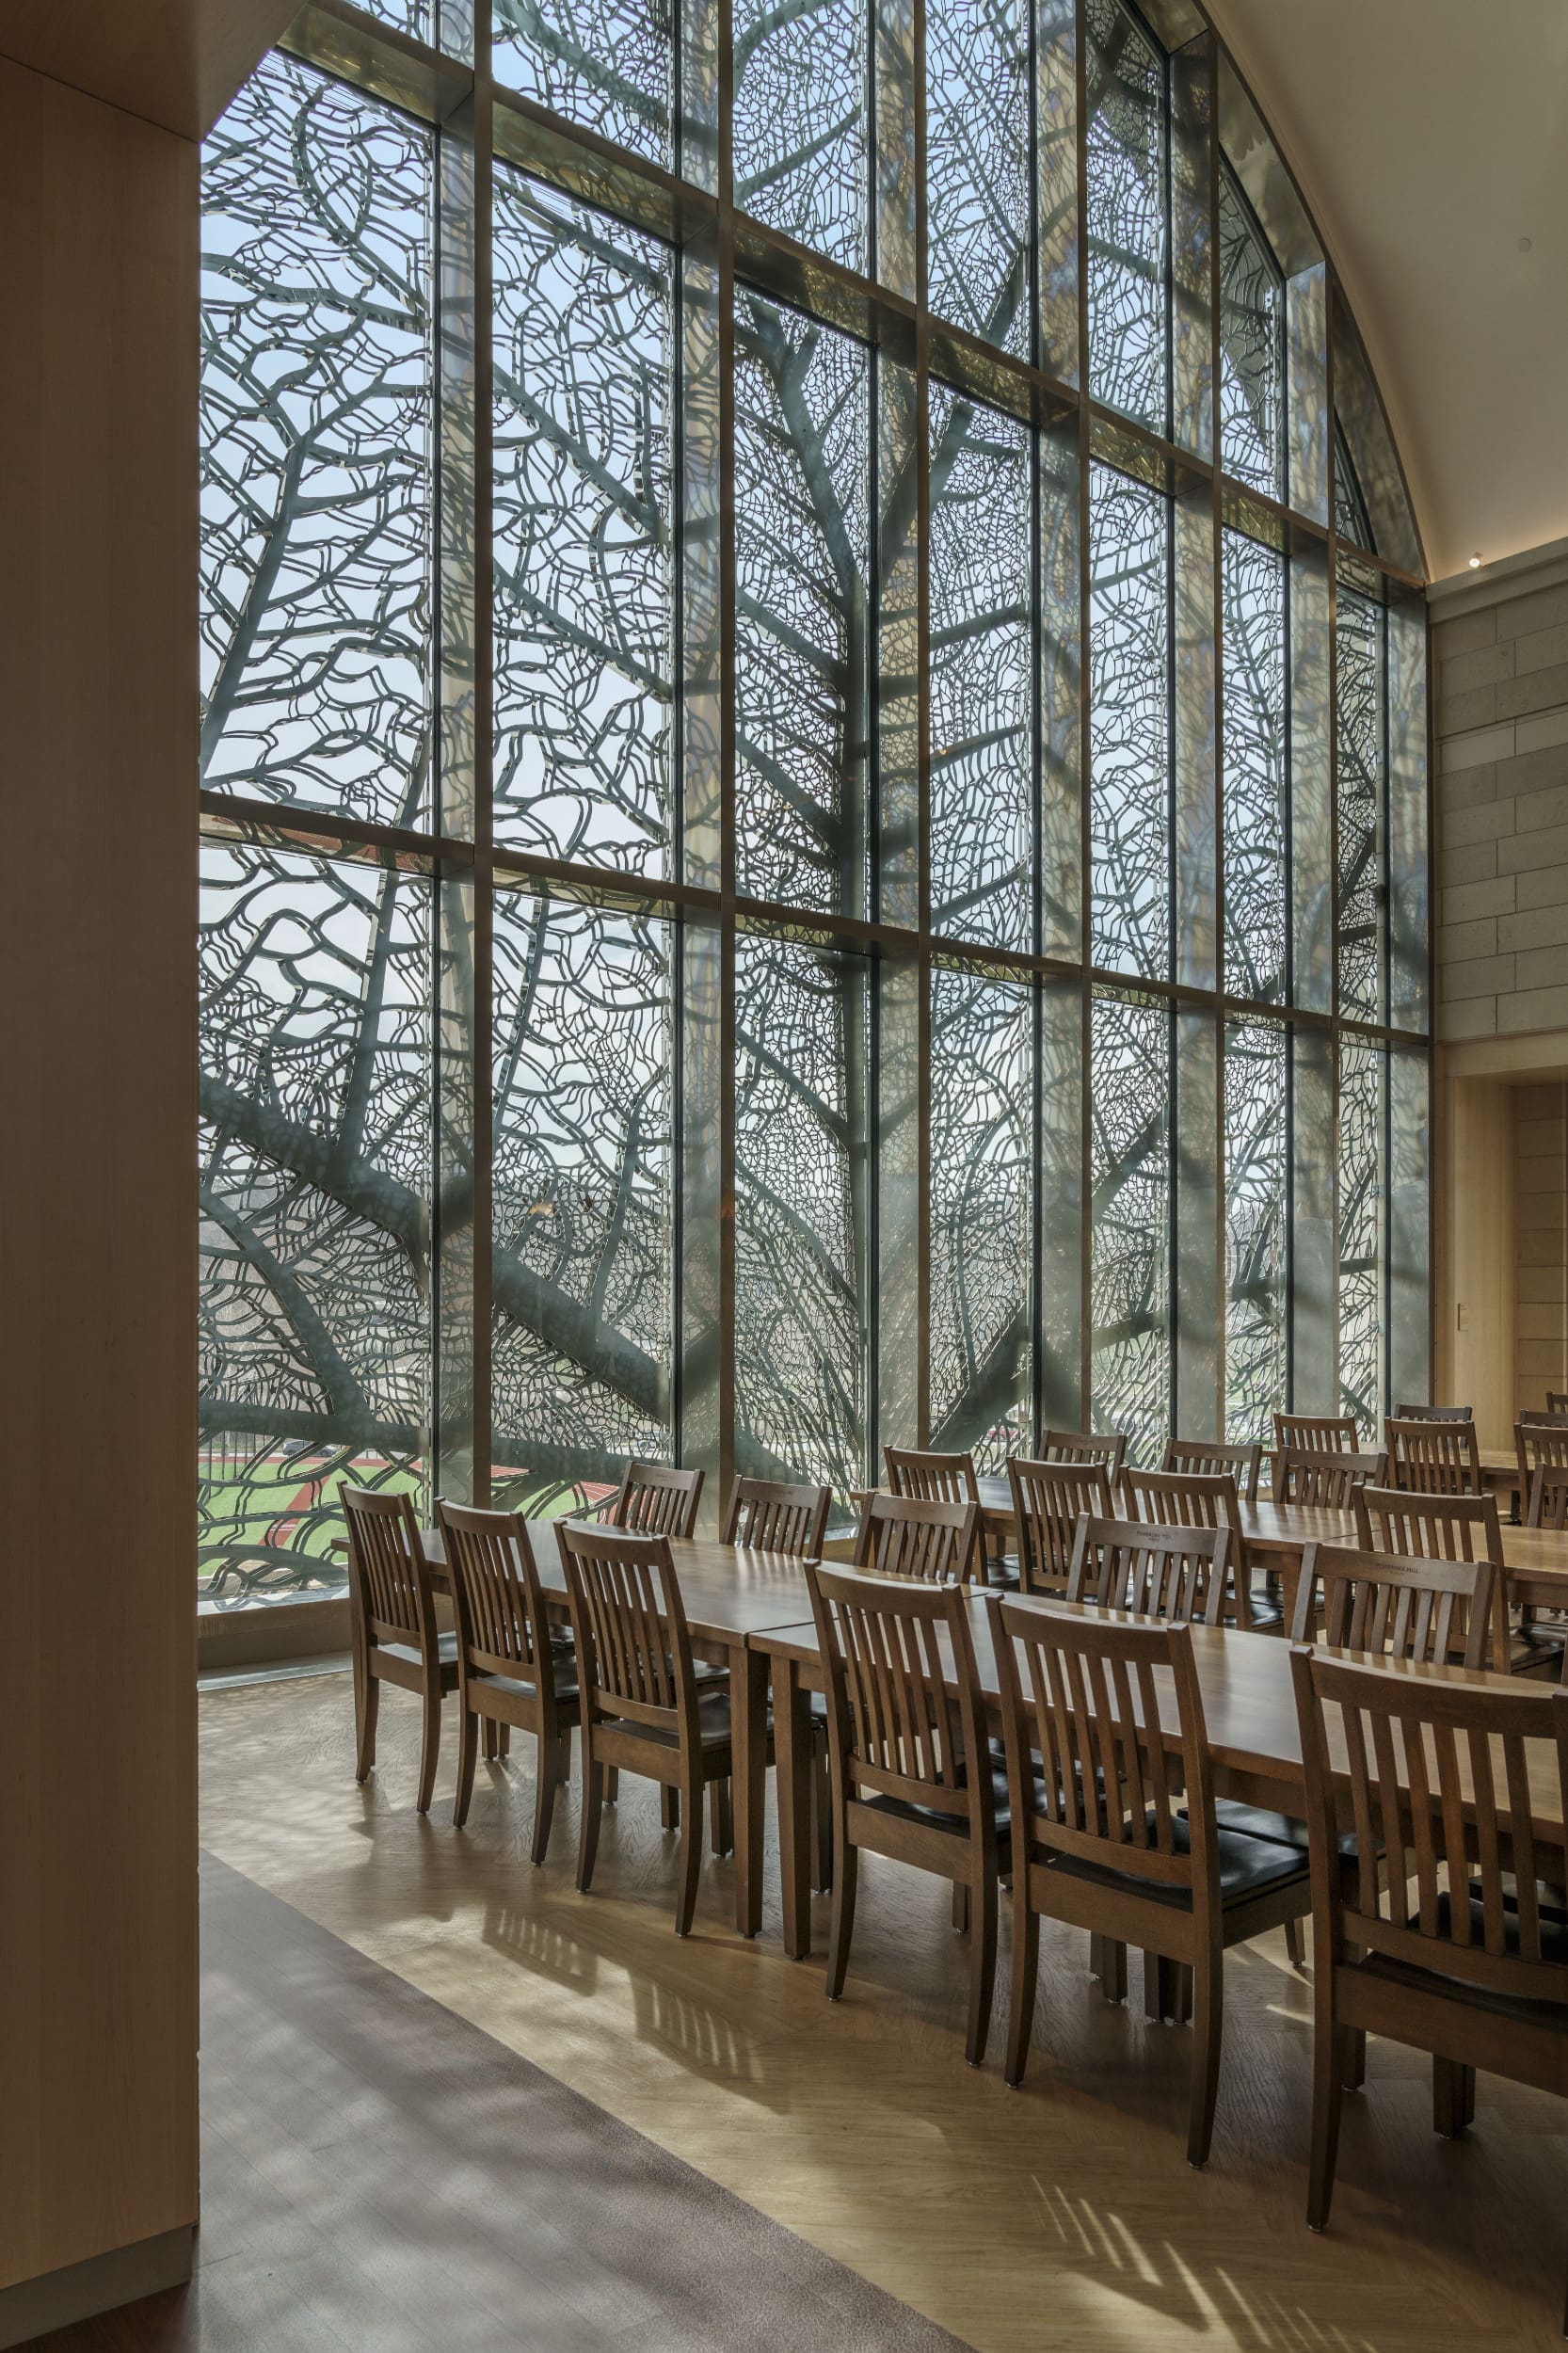 Interior view of the Pembroke Hill dining hall and Jan Hendrix window installation.